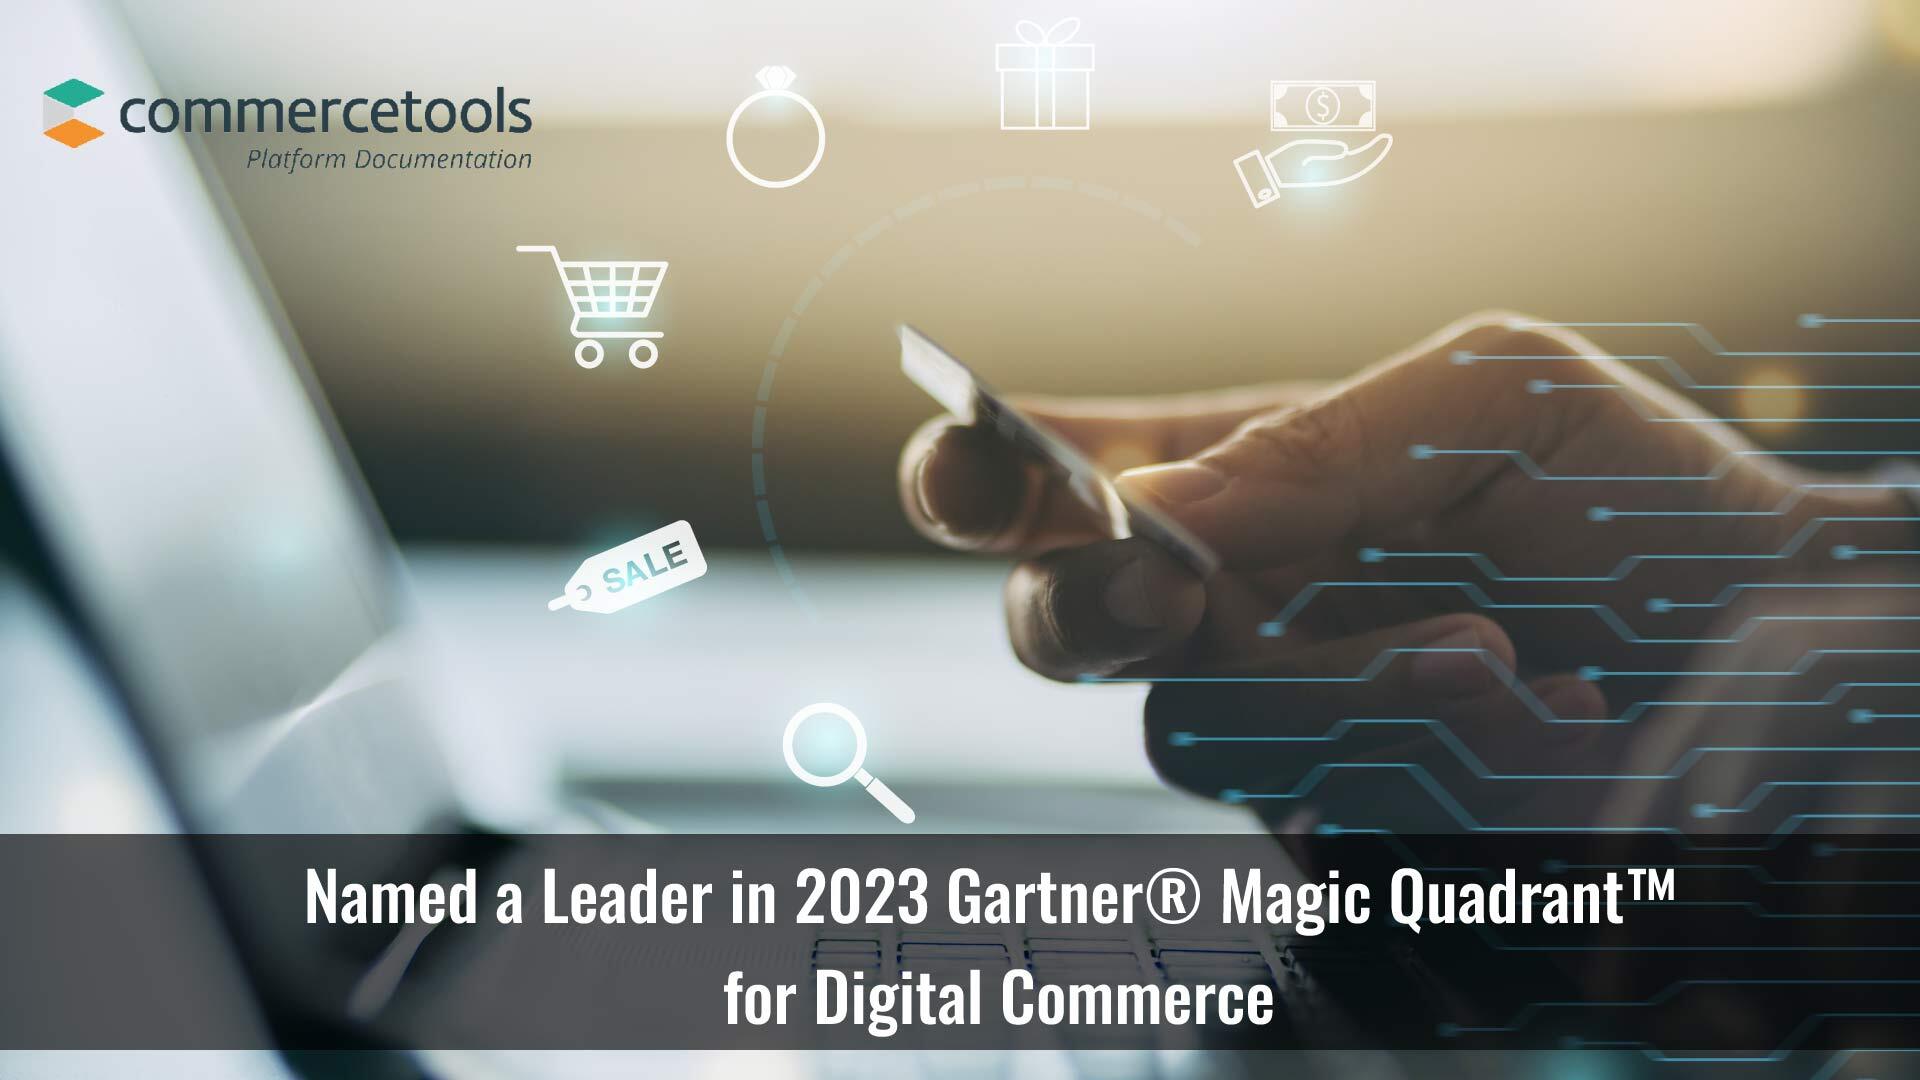 commercetools Named a Leader in 2023 Gartner® Magic Quadrant™ for Digital Commerce for Fourth Year in a Row